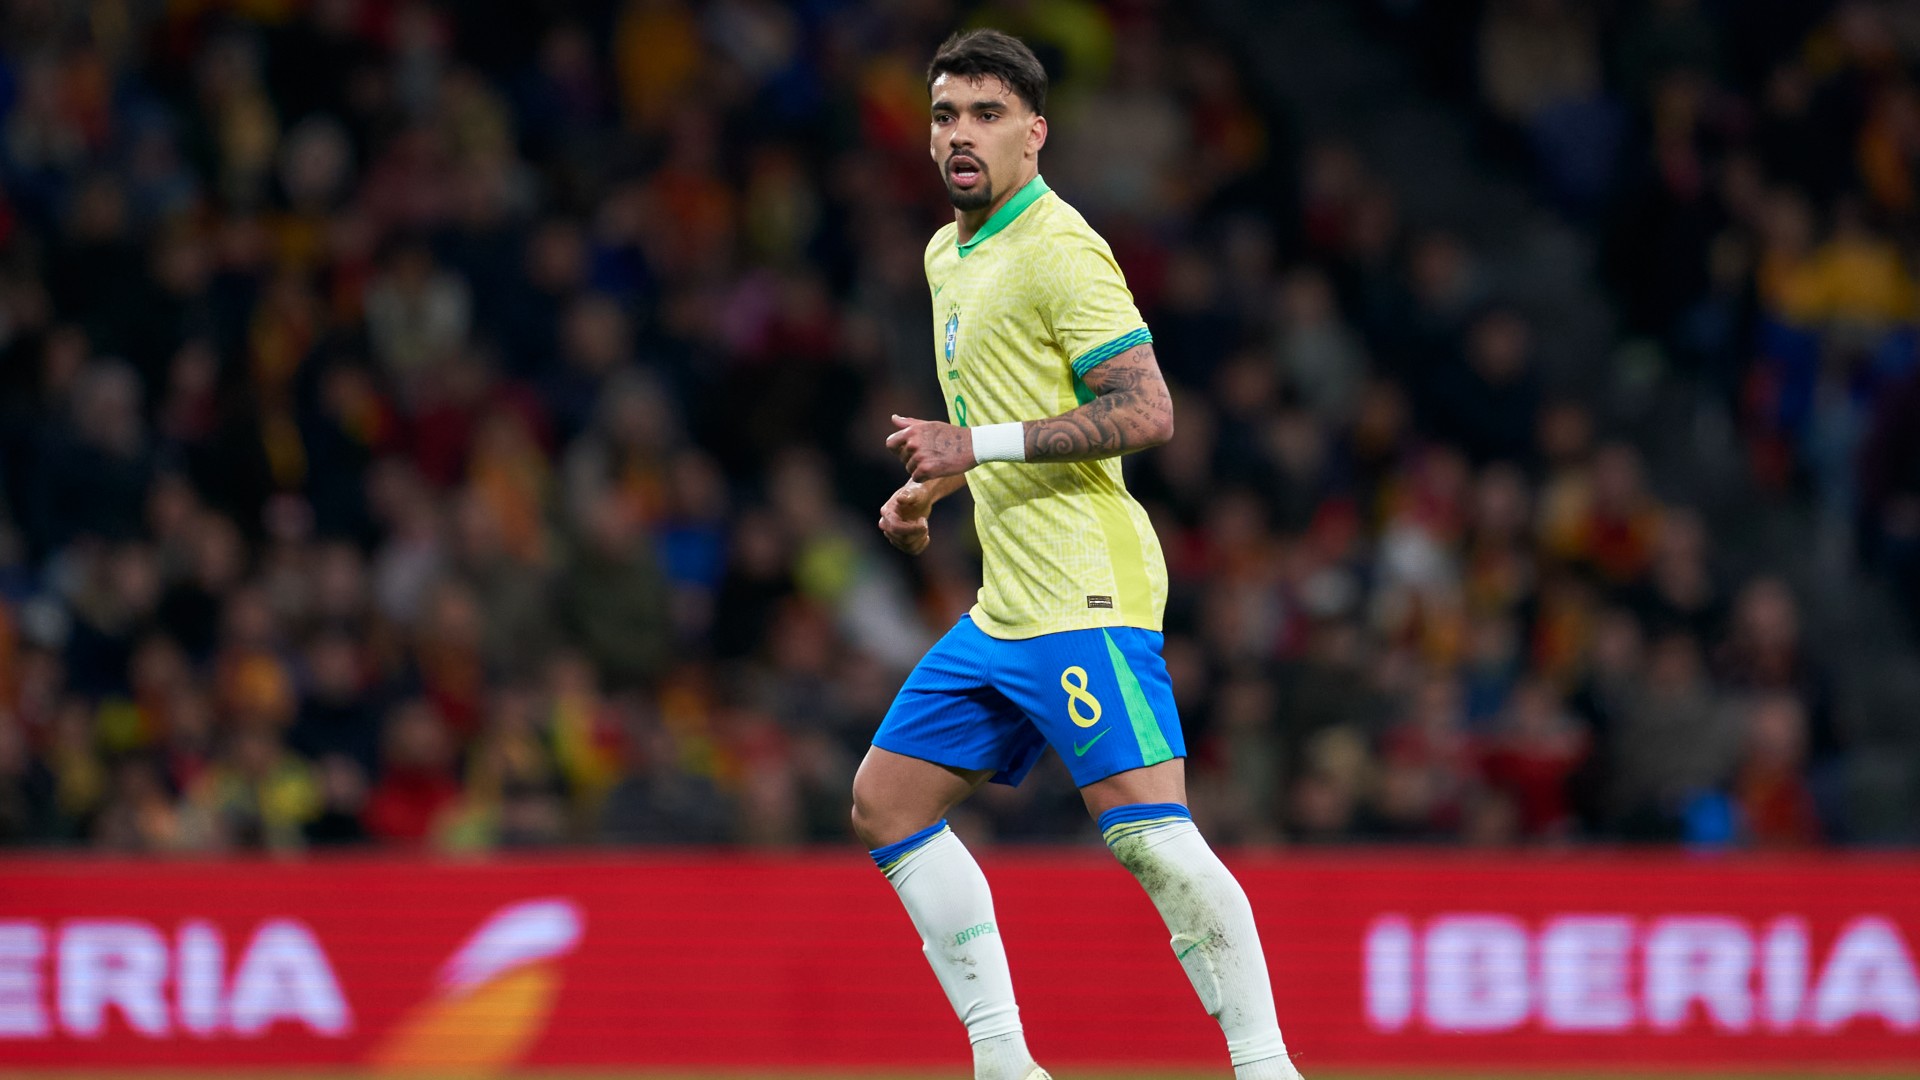 Paqueta staying in Brazil squad